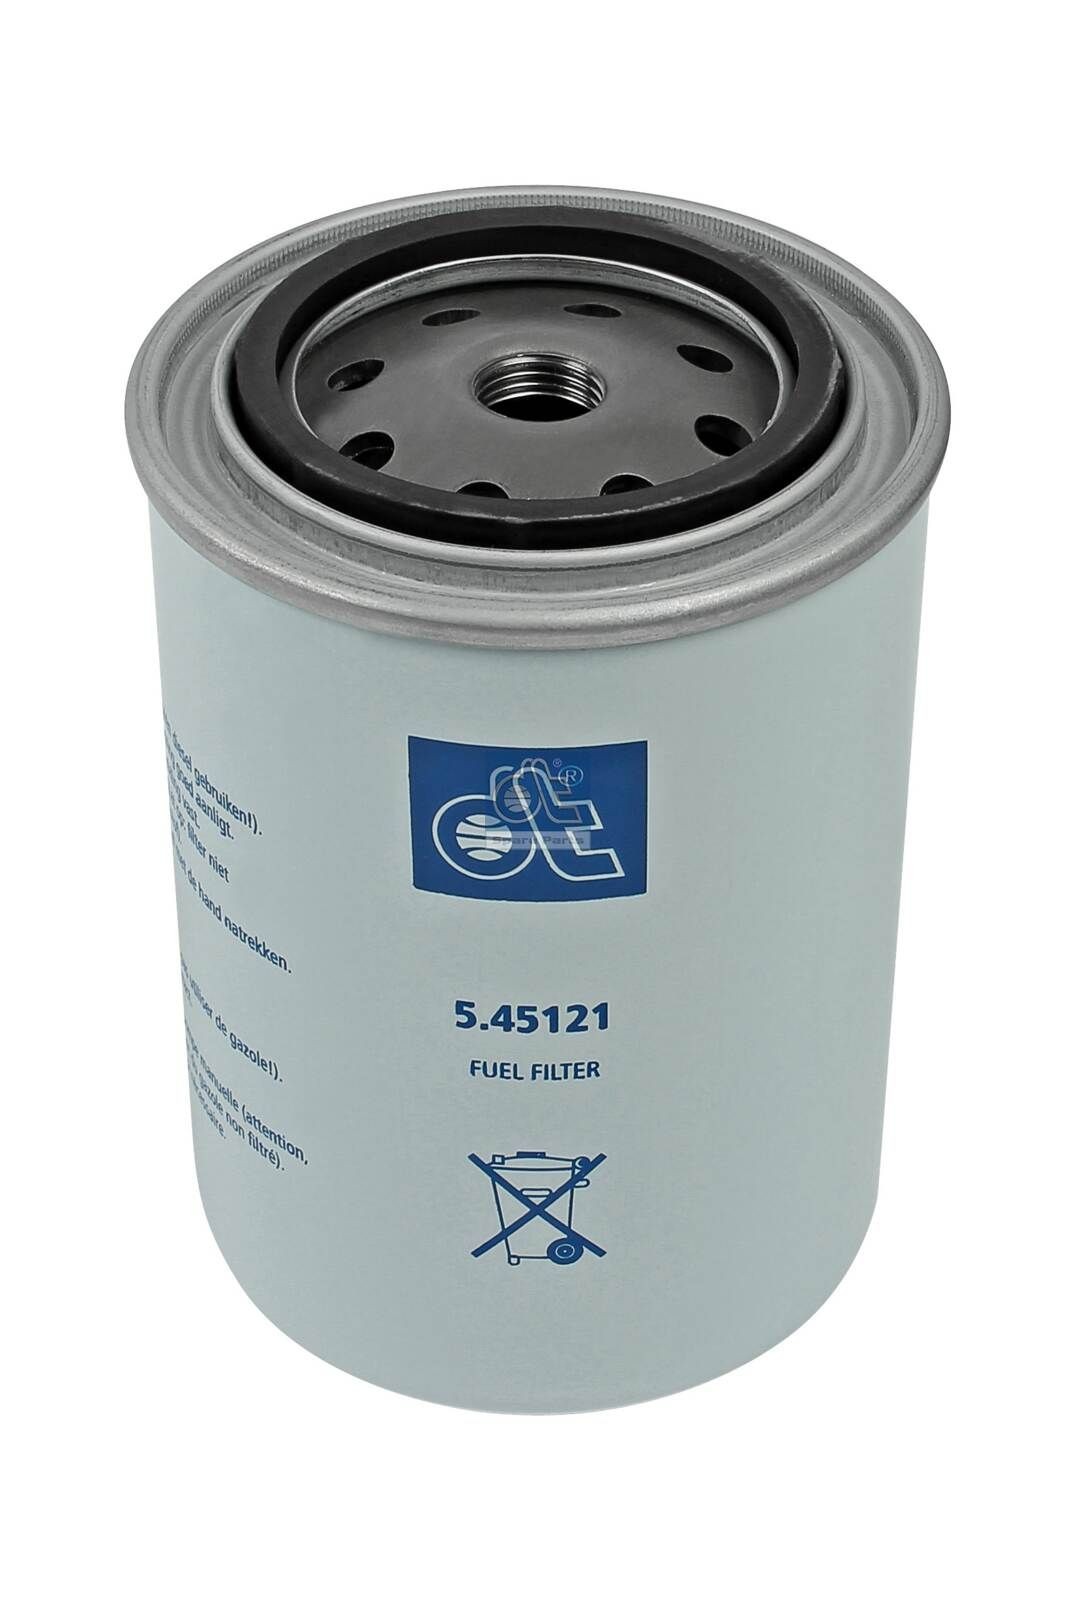 WDK 940/5 DT Spare Parts 5.45121 Fuel filter 00 0178 034 0